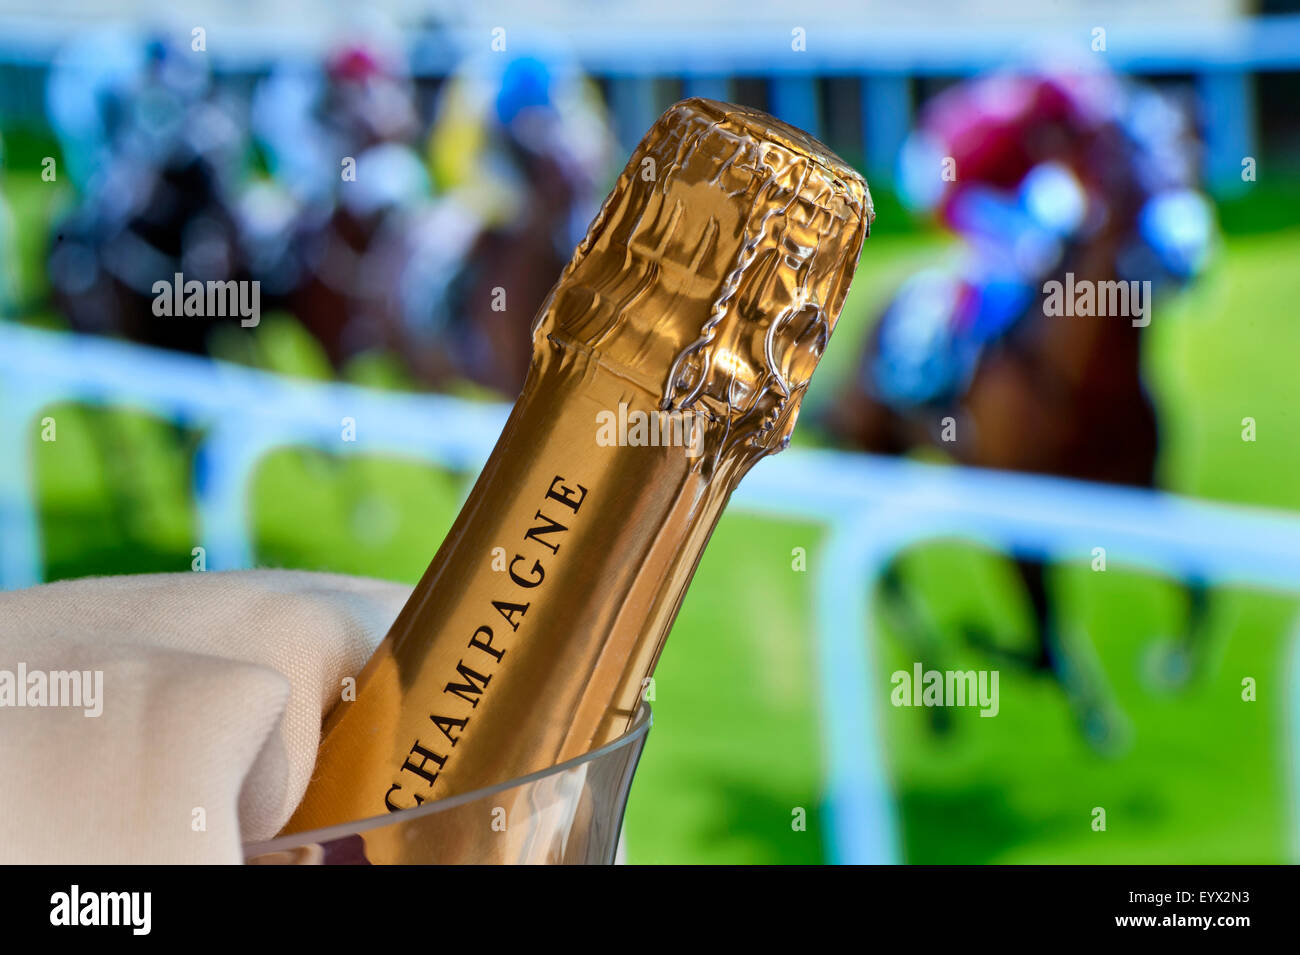 Ascot races champagne bottle in cooler with Royal Ascot Ladies Day horse racing in background Ascot Berkshire UK Stock Photo